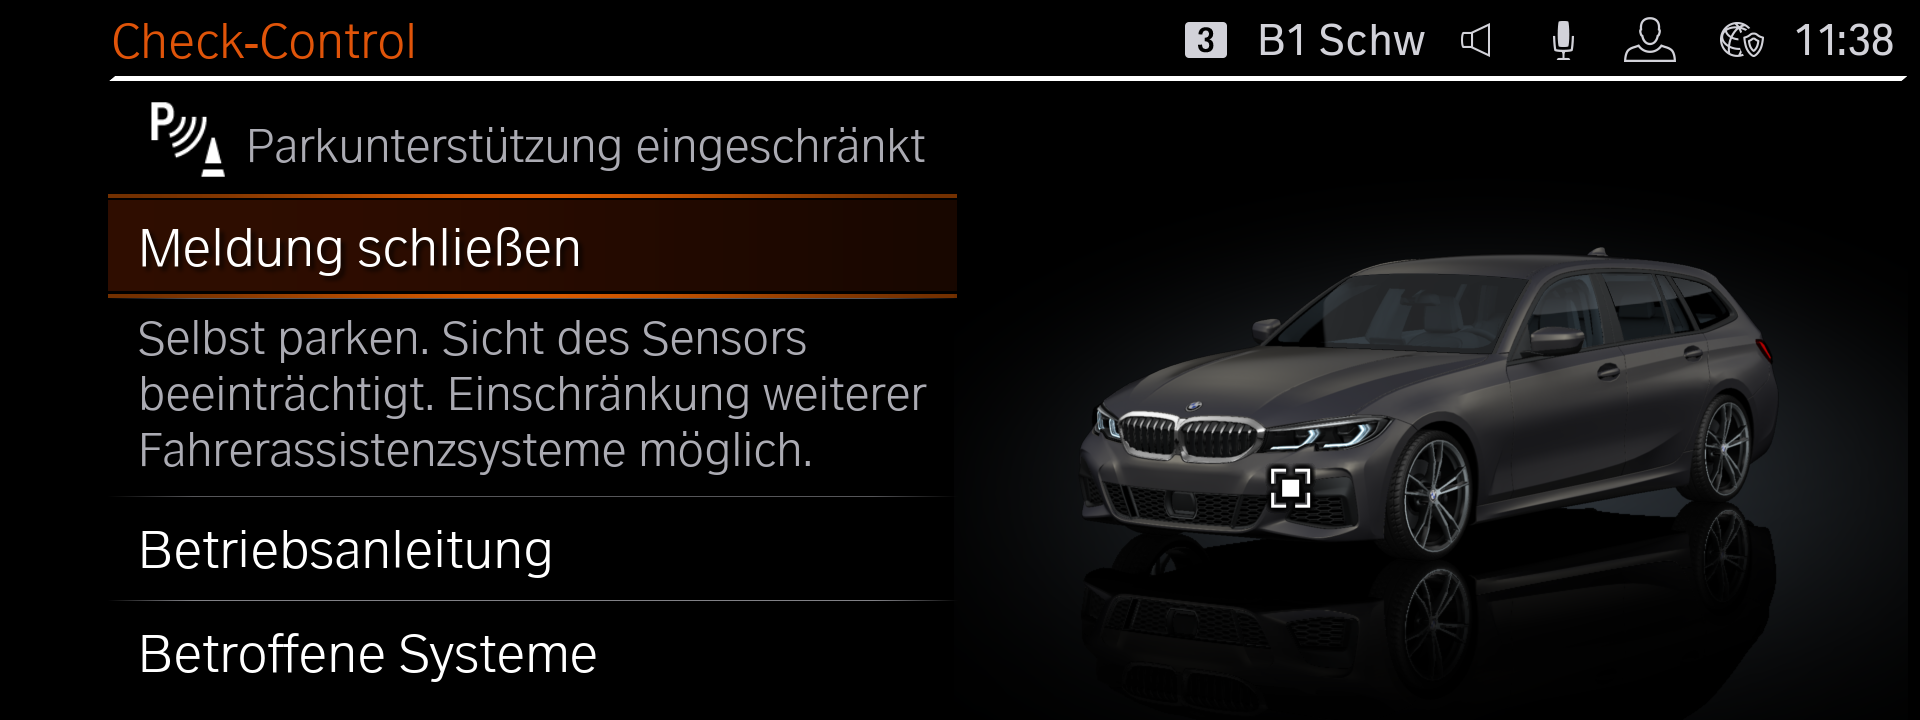 WELL DONE, BMW!”